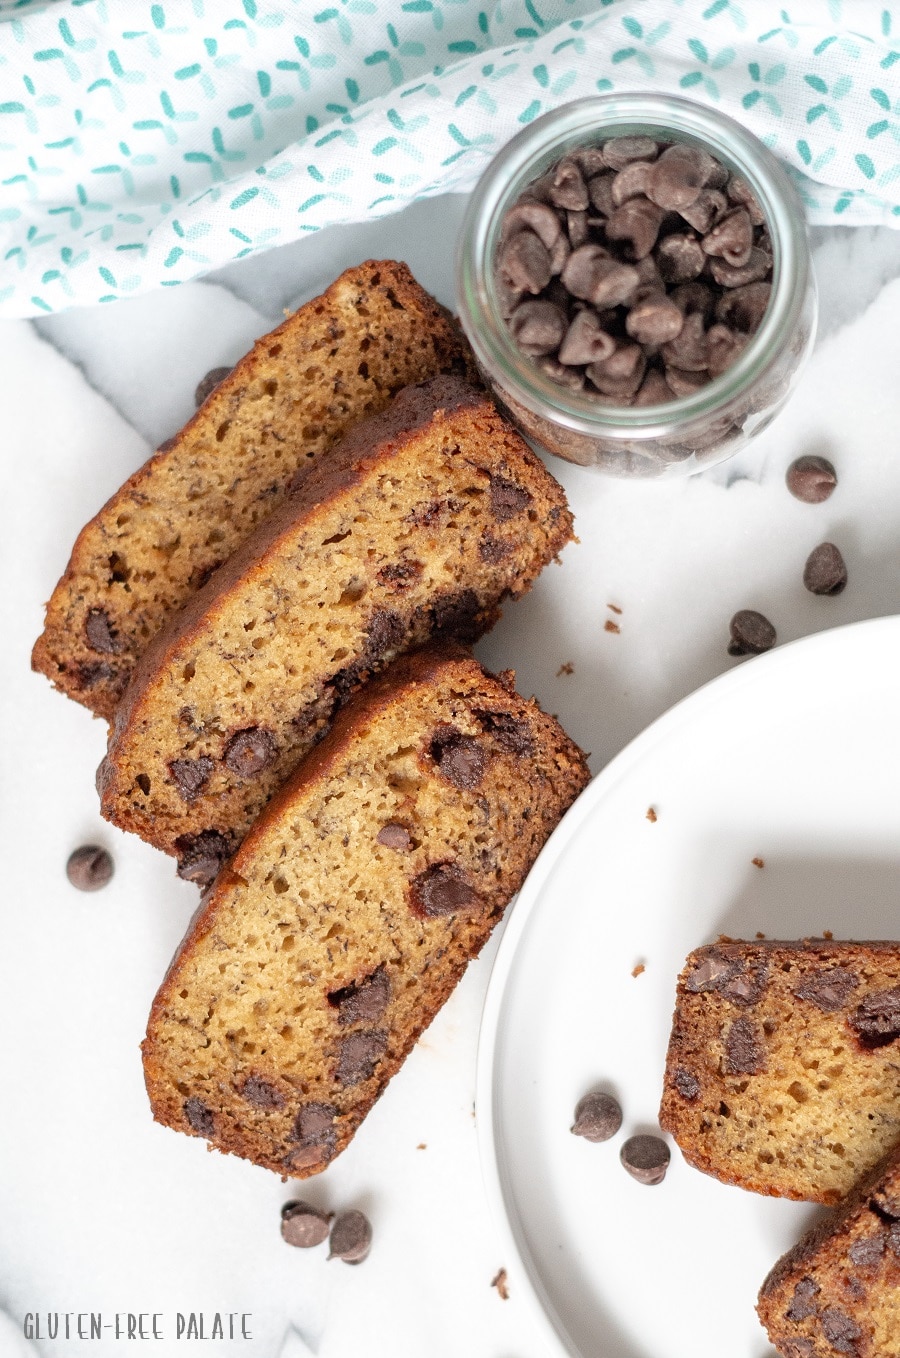 slices of gluten-free banana bread next to a white plate with slices of banana bread, and a jar of chocolate chips next to a blue and white towel